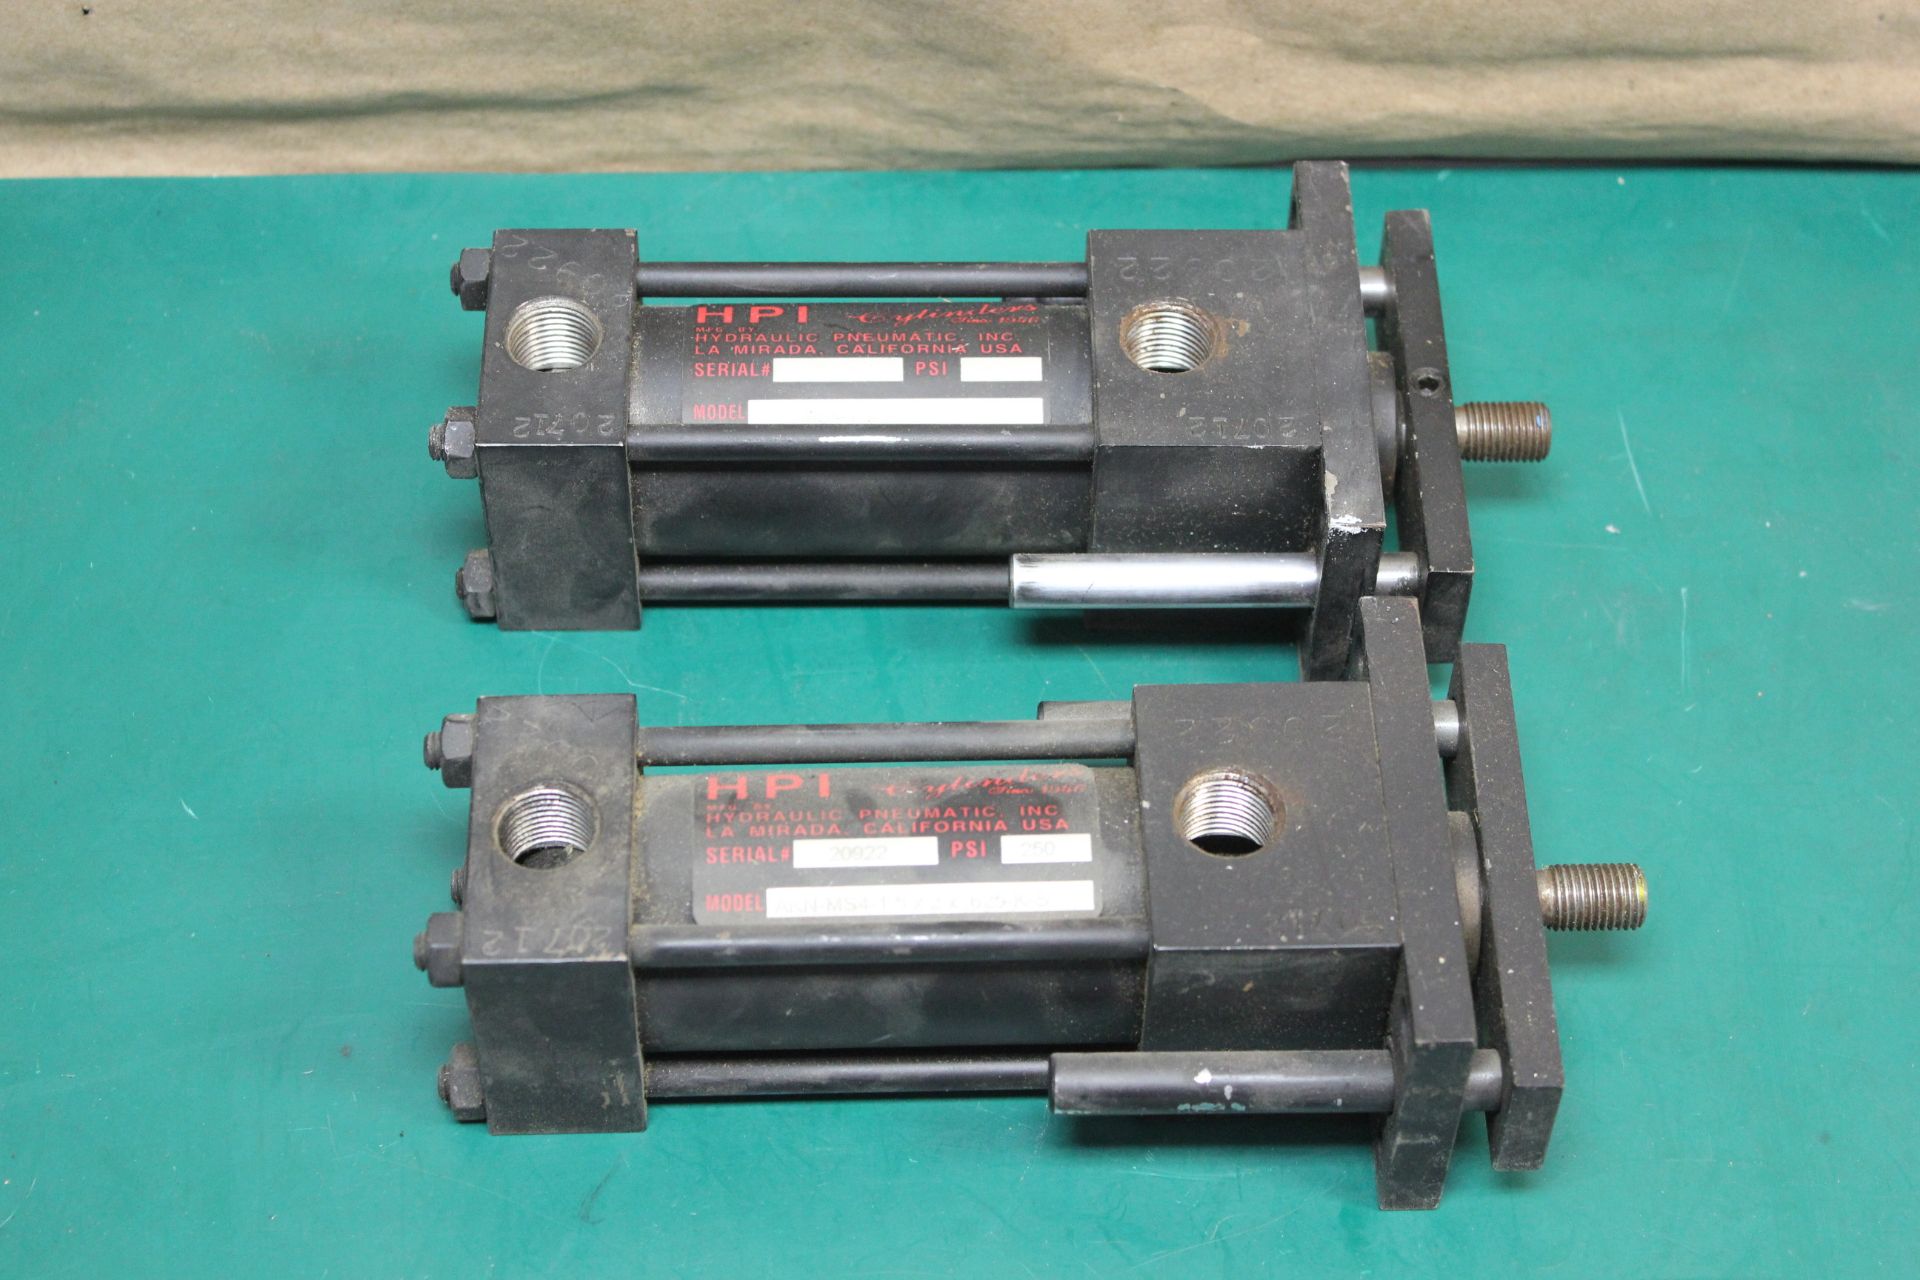 LOT OF 2 HPI HYDRAULIC PNEUMATIC CYLINDERS